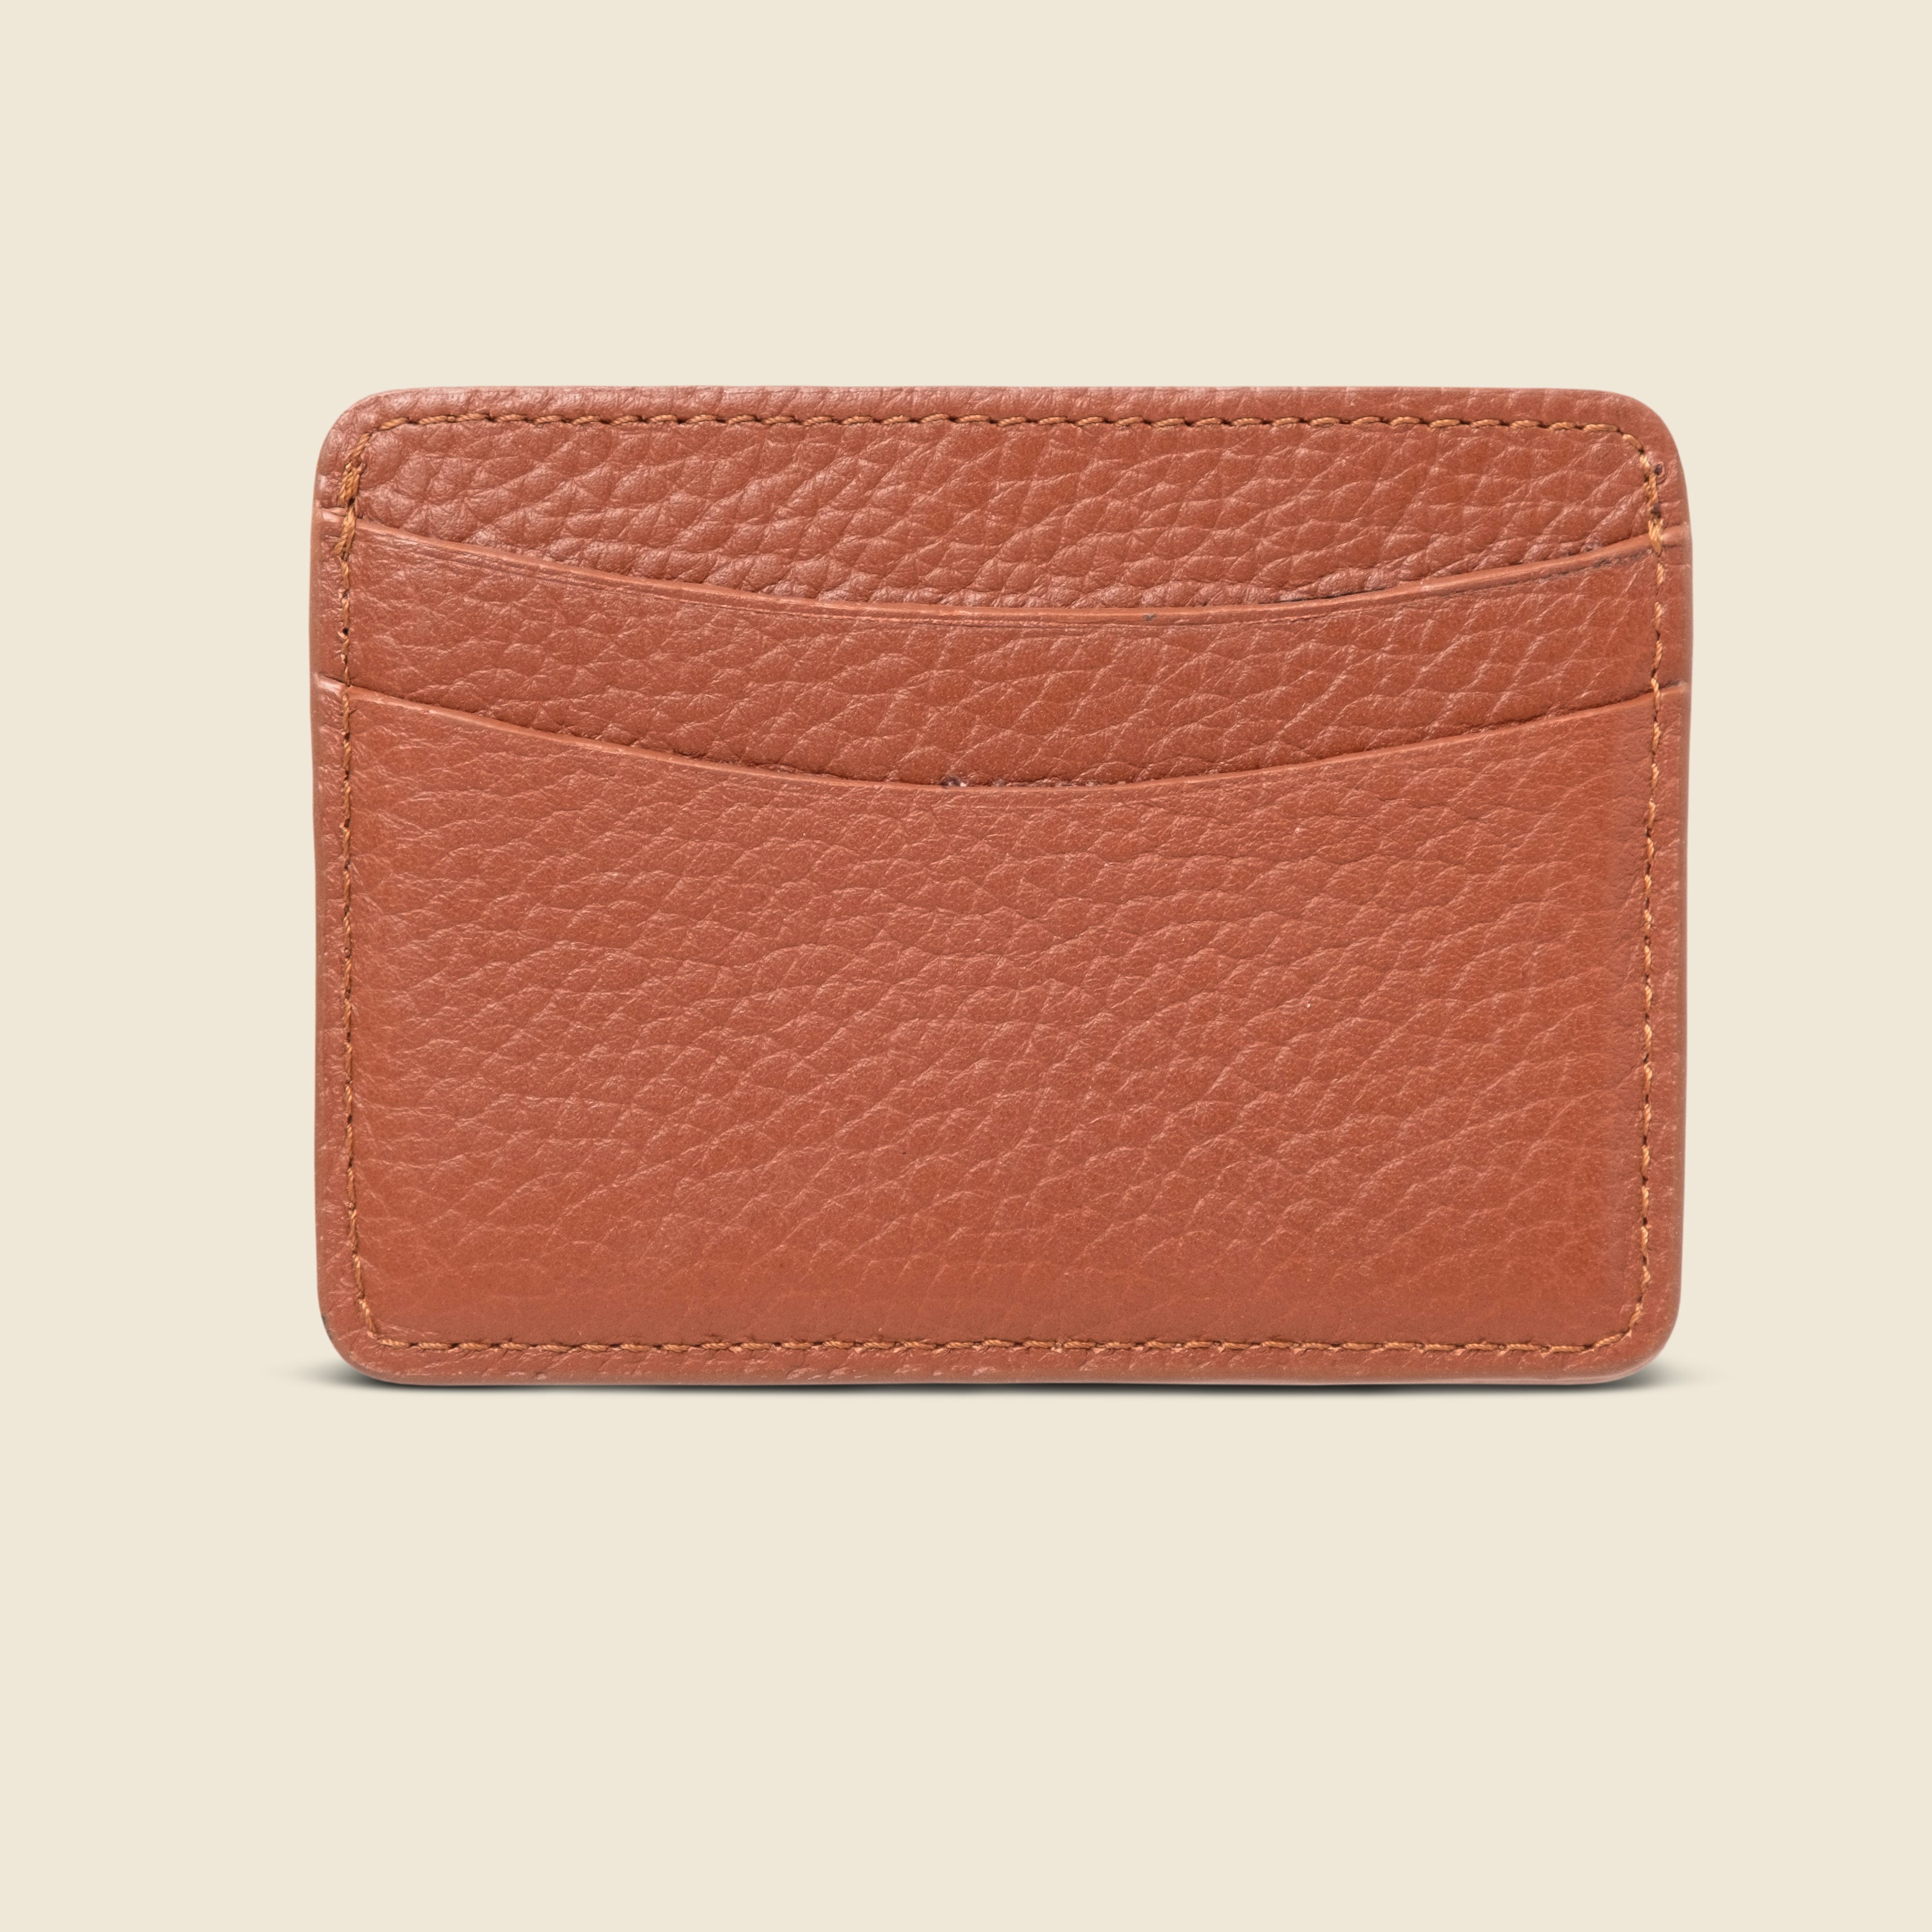 small leather wallet for corporate gifts for executives